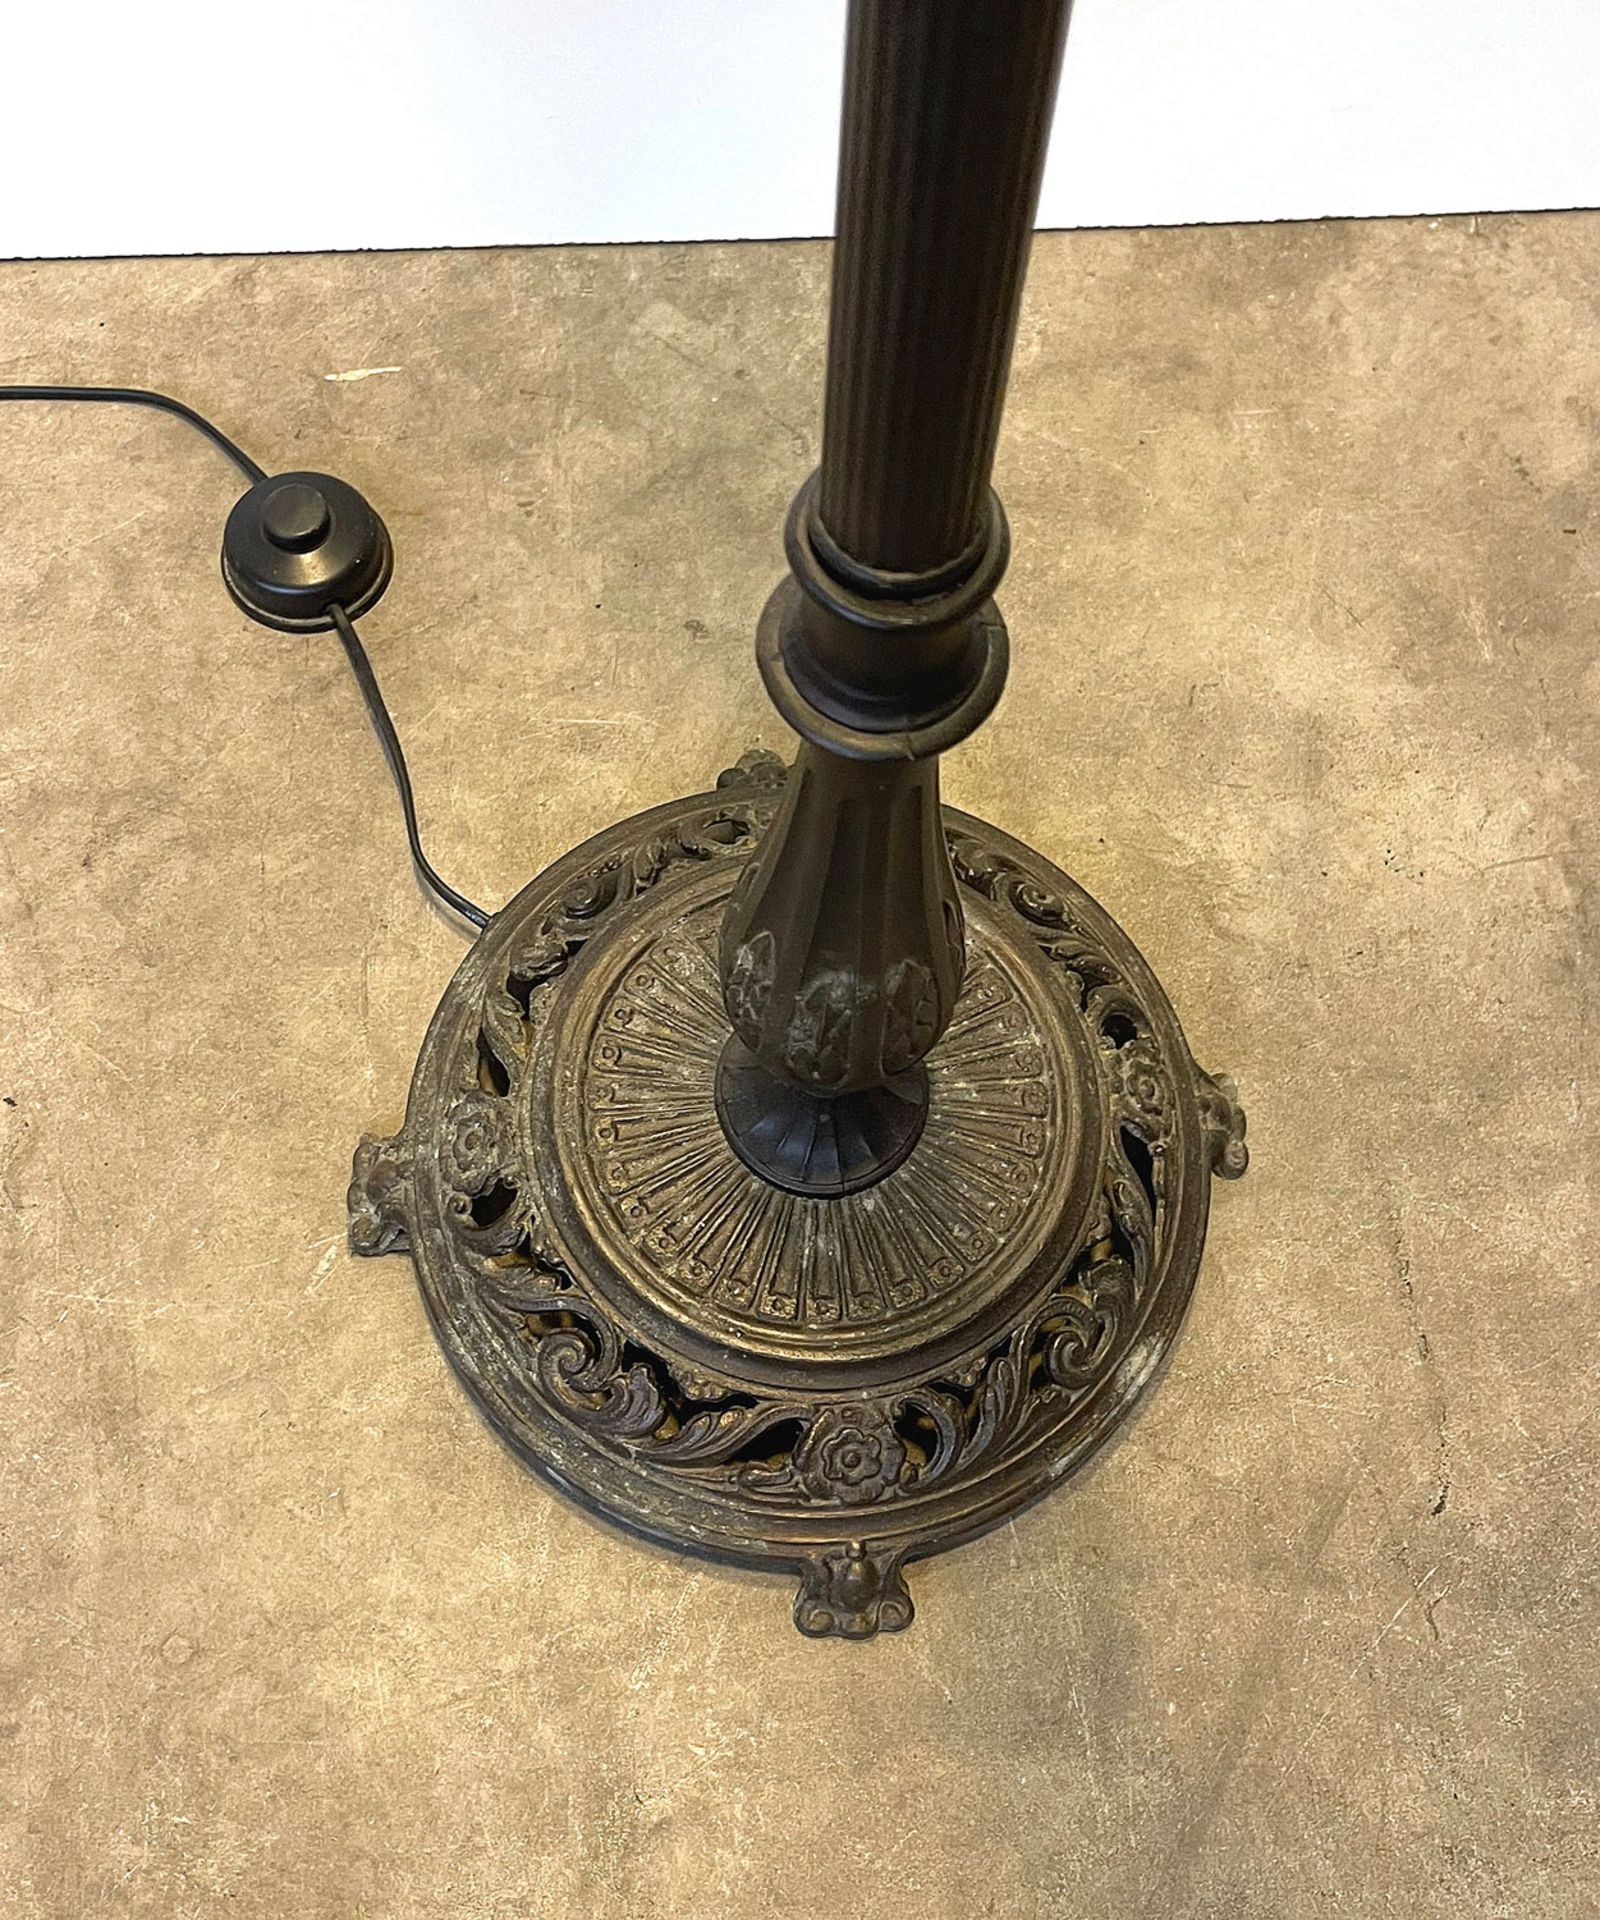 Tiffany Style Standing Floor Lamp with Metal Base - Image 3 of 5